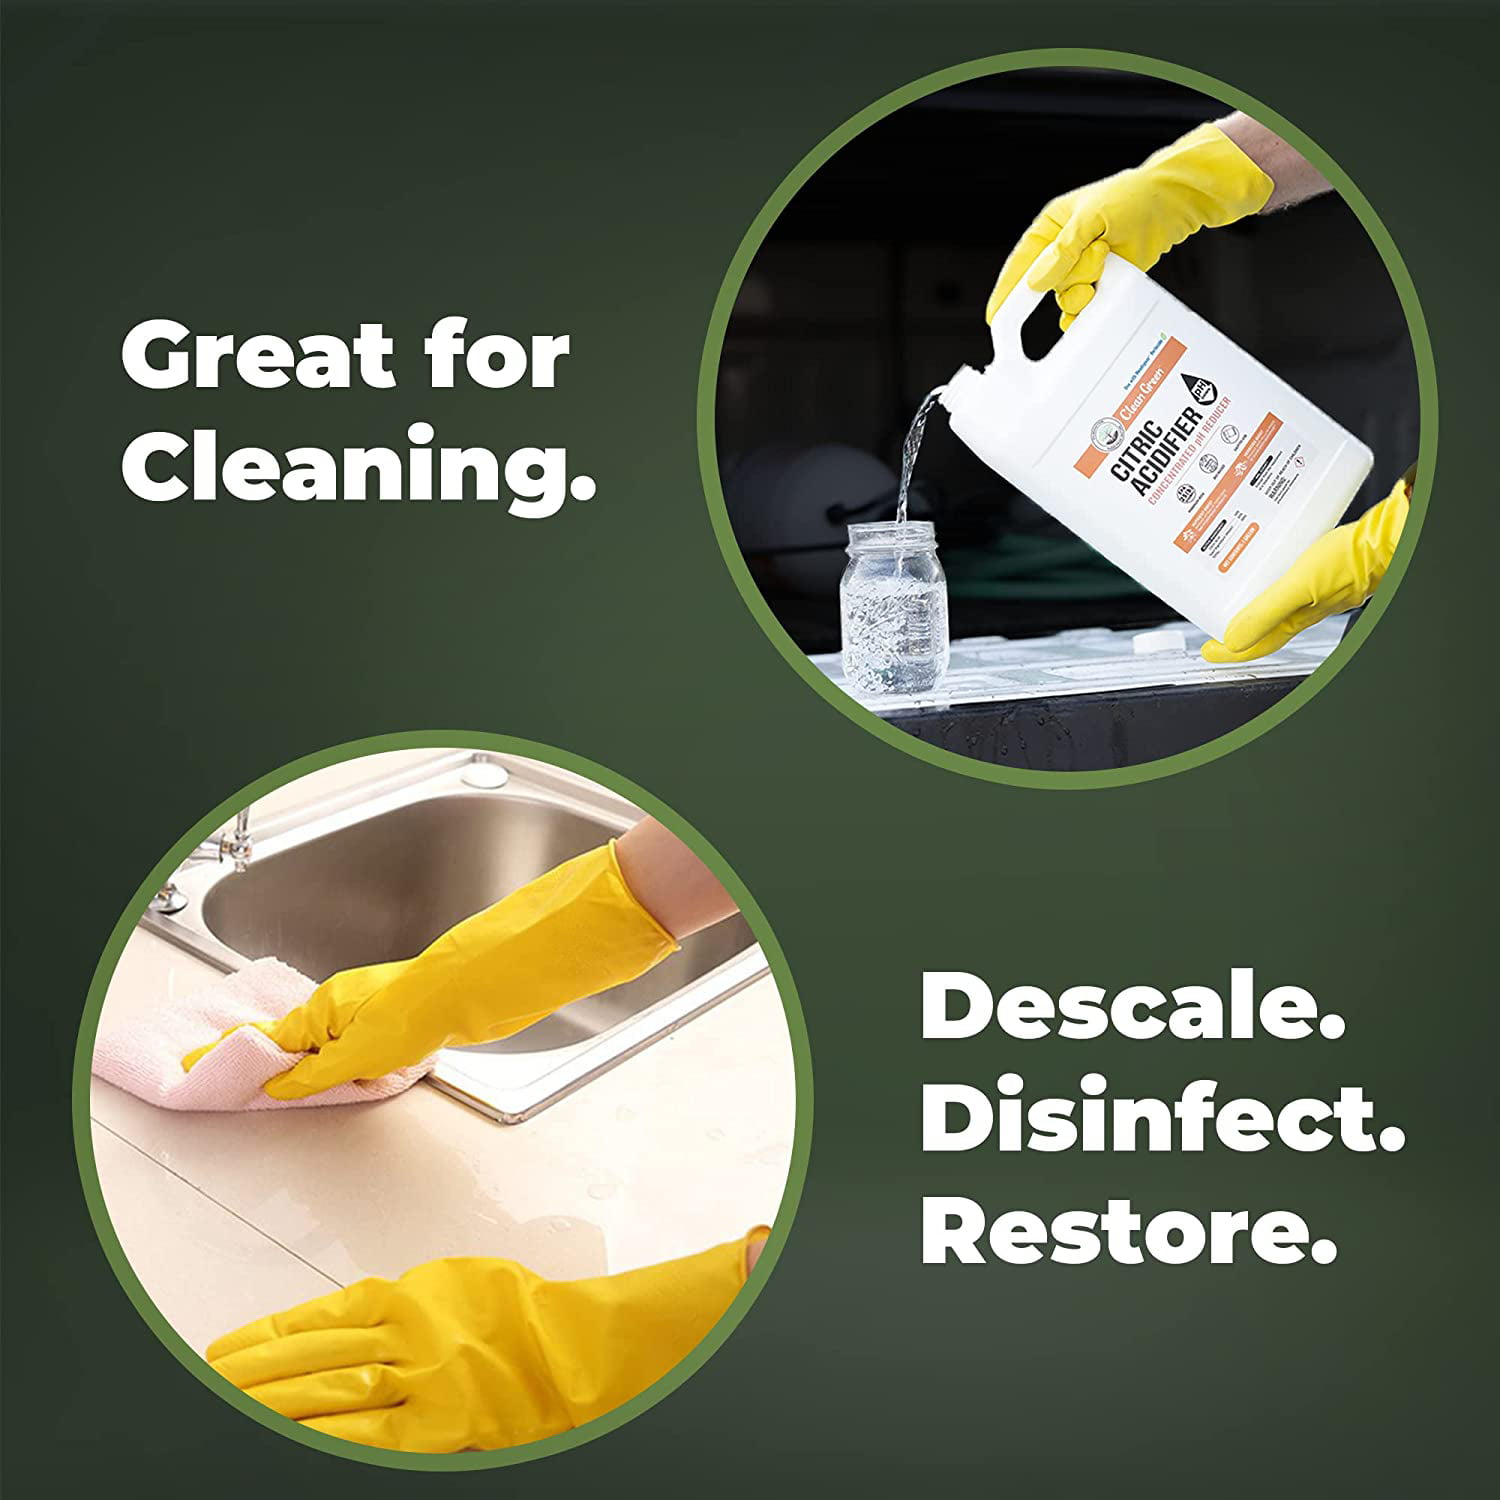 items you can clean with citric acid #citricacid #cleaning2021 #cleani